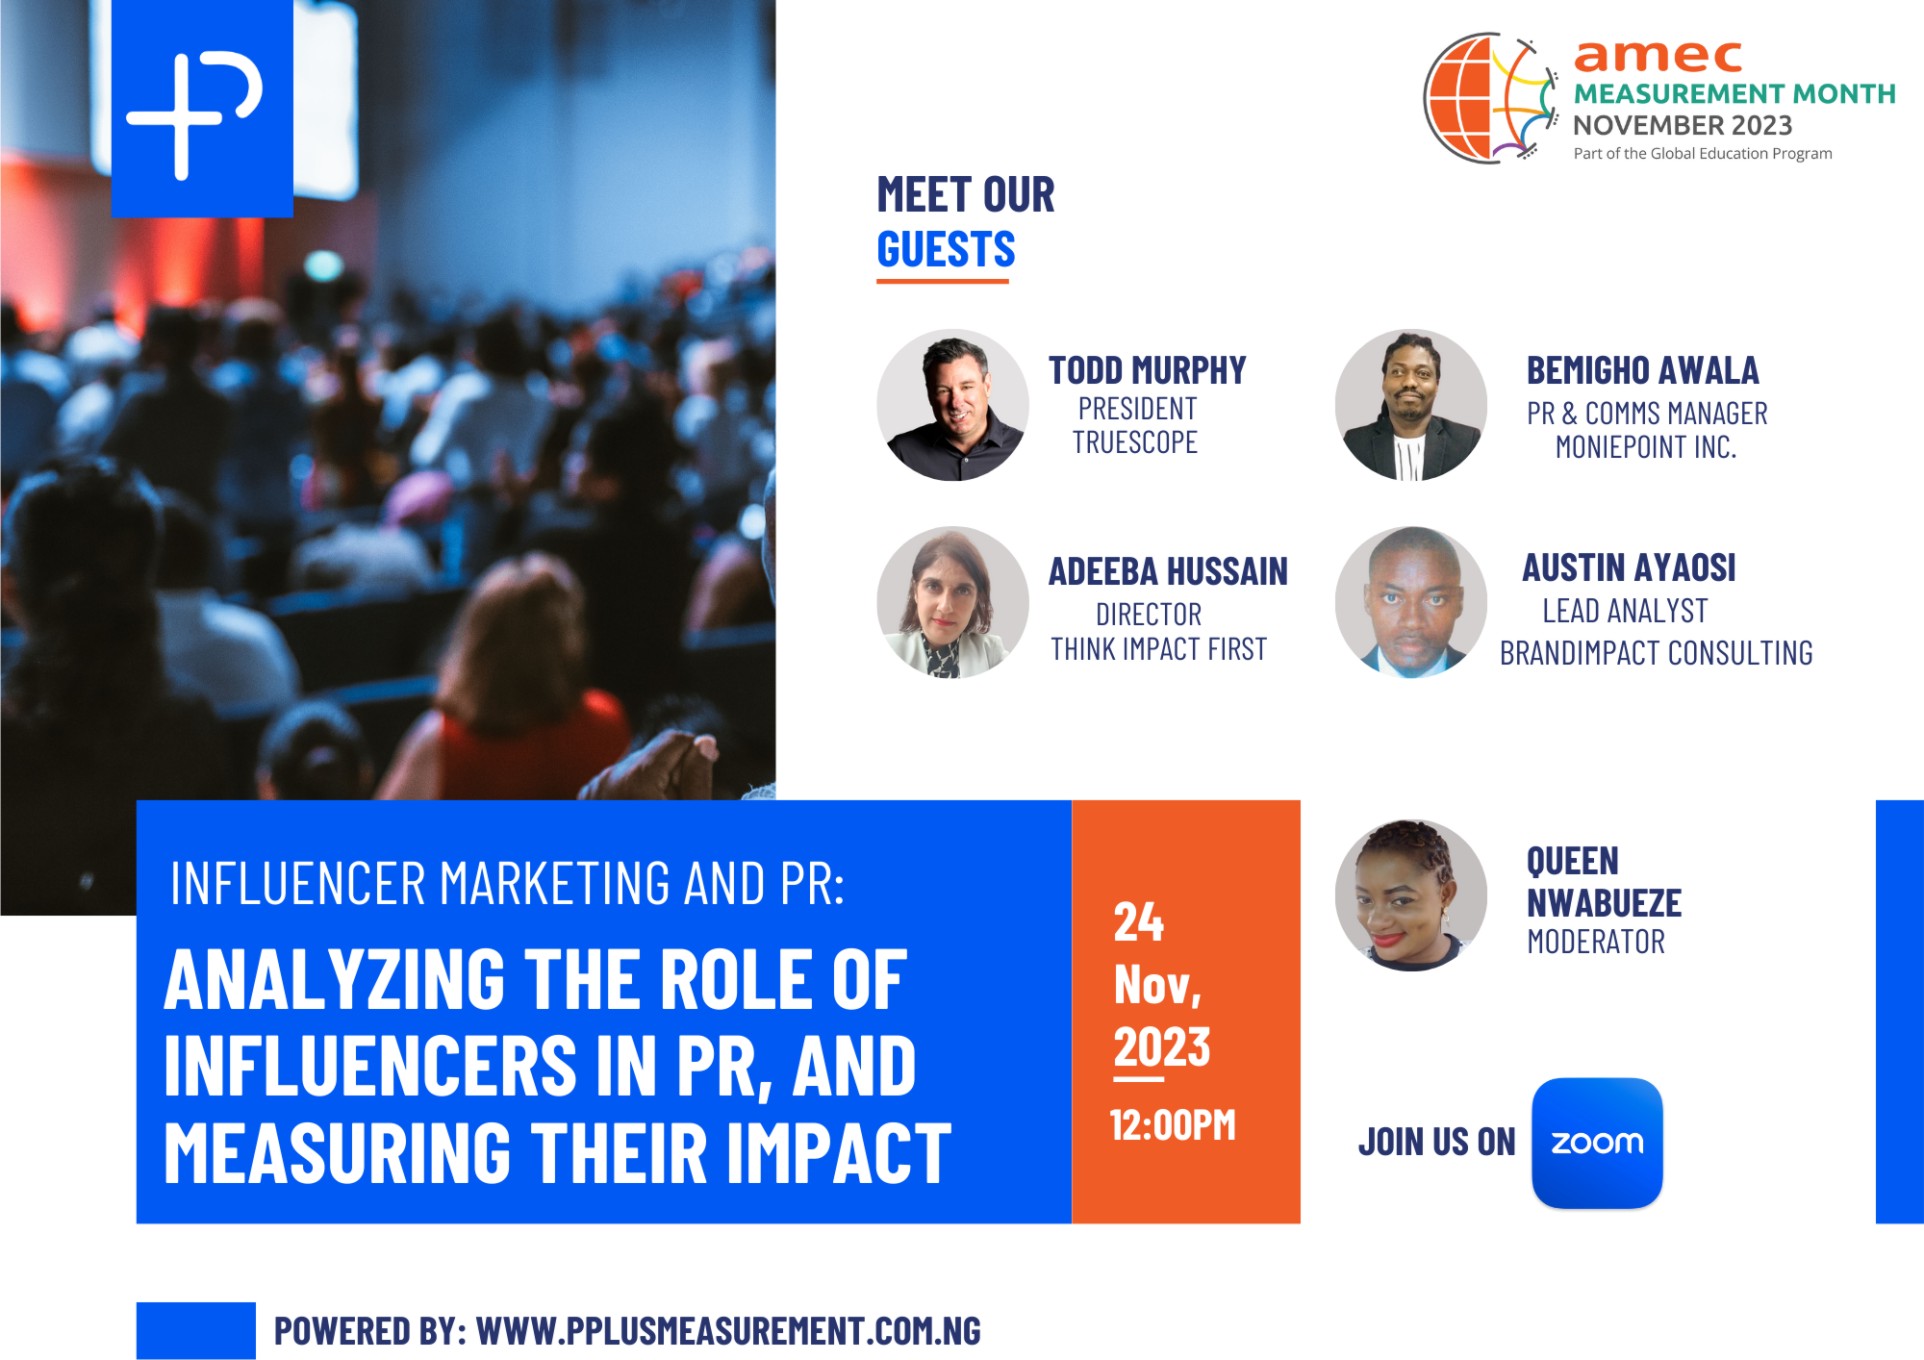 P+ Measurement Services Announces 7th Consecutive Hosting Of AMEC Measurement Month, Focused On Influencer Marketing And PR-marketingspace.com.ng